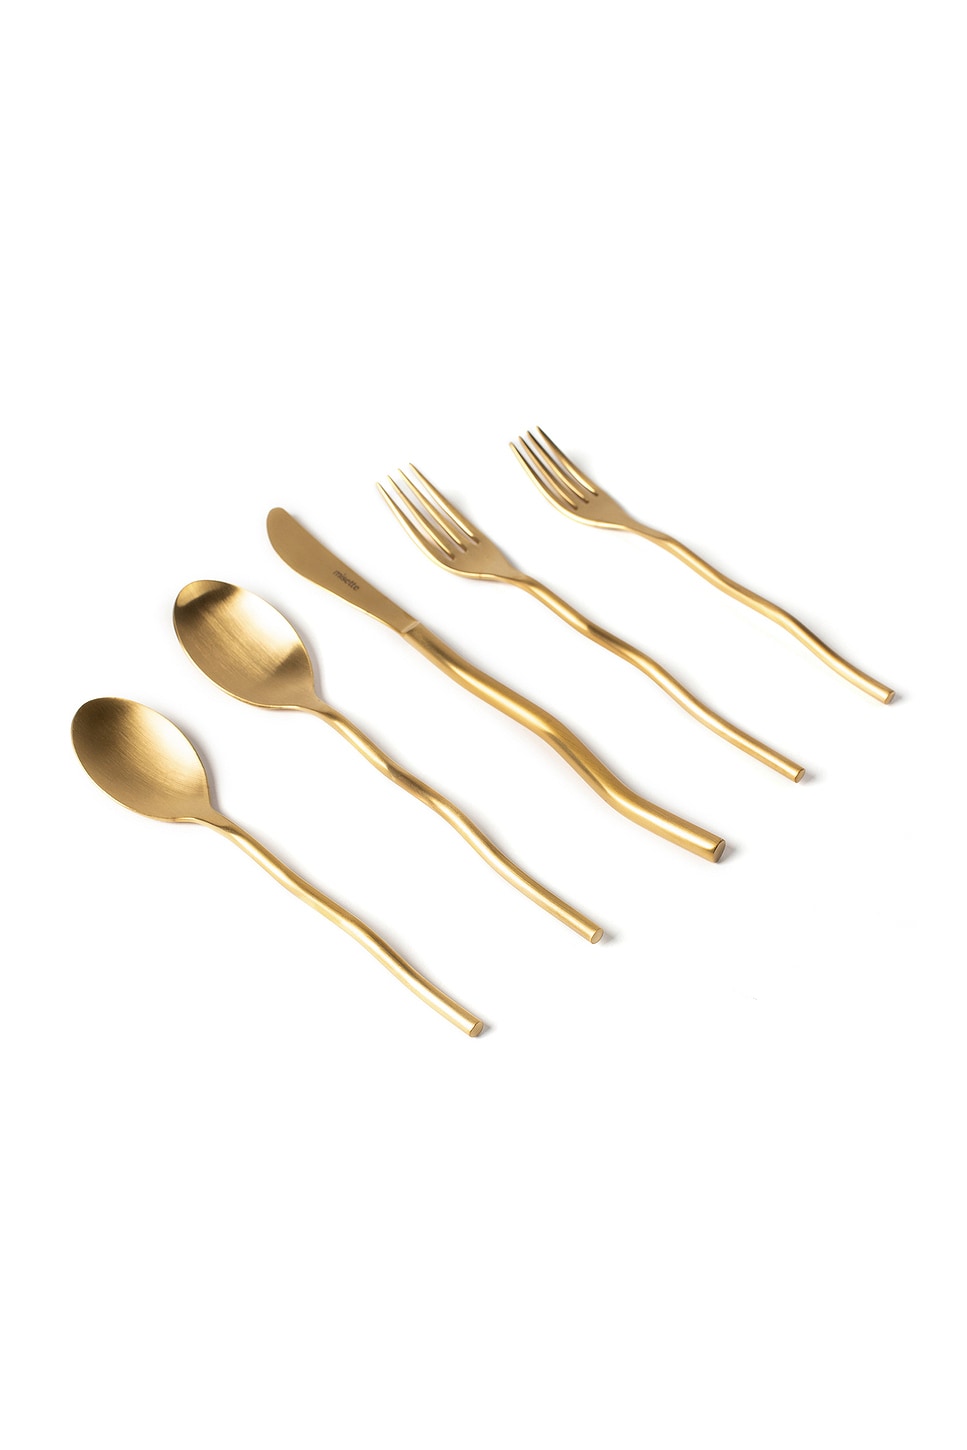 Image 1 of Misette Squiggle 5 Piece Cutlery Set in Matte Gold